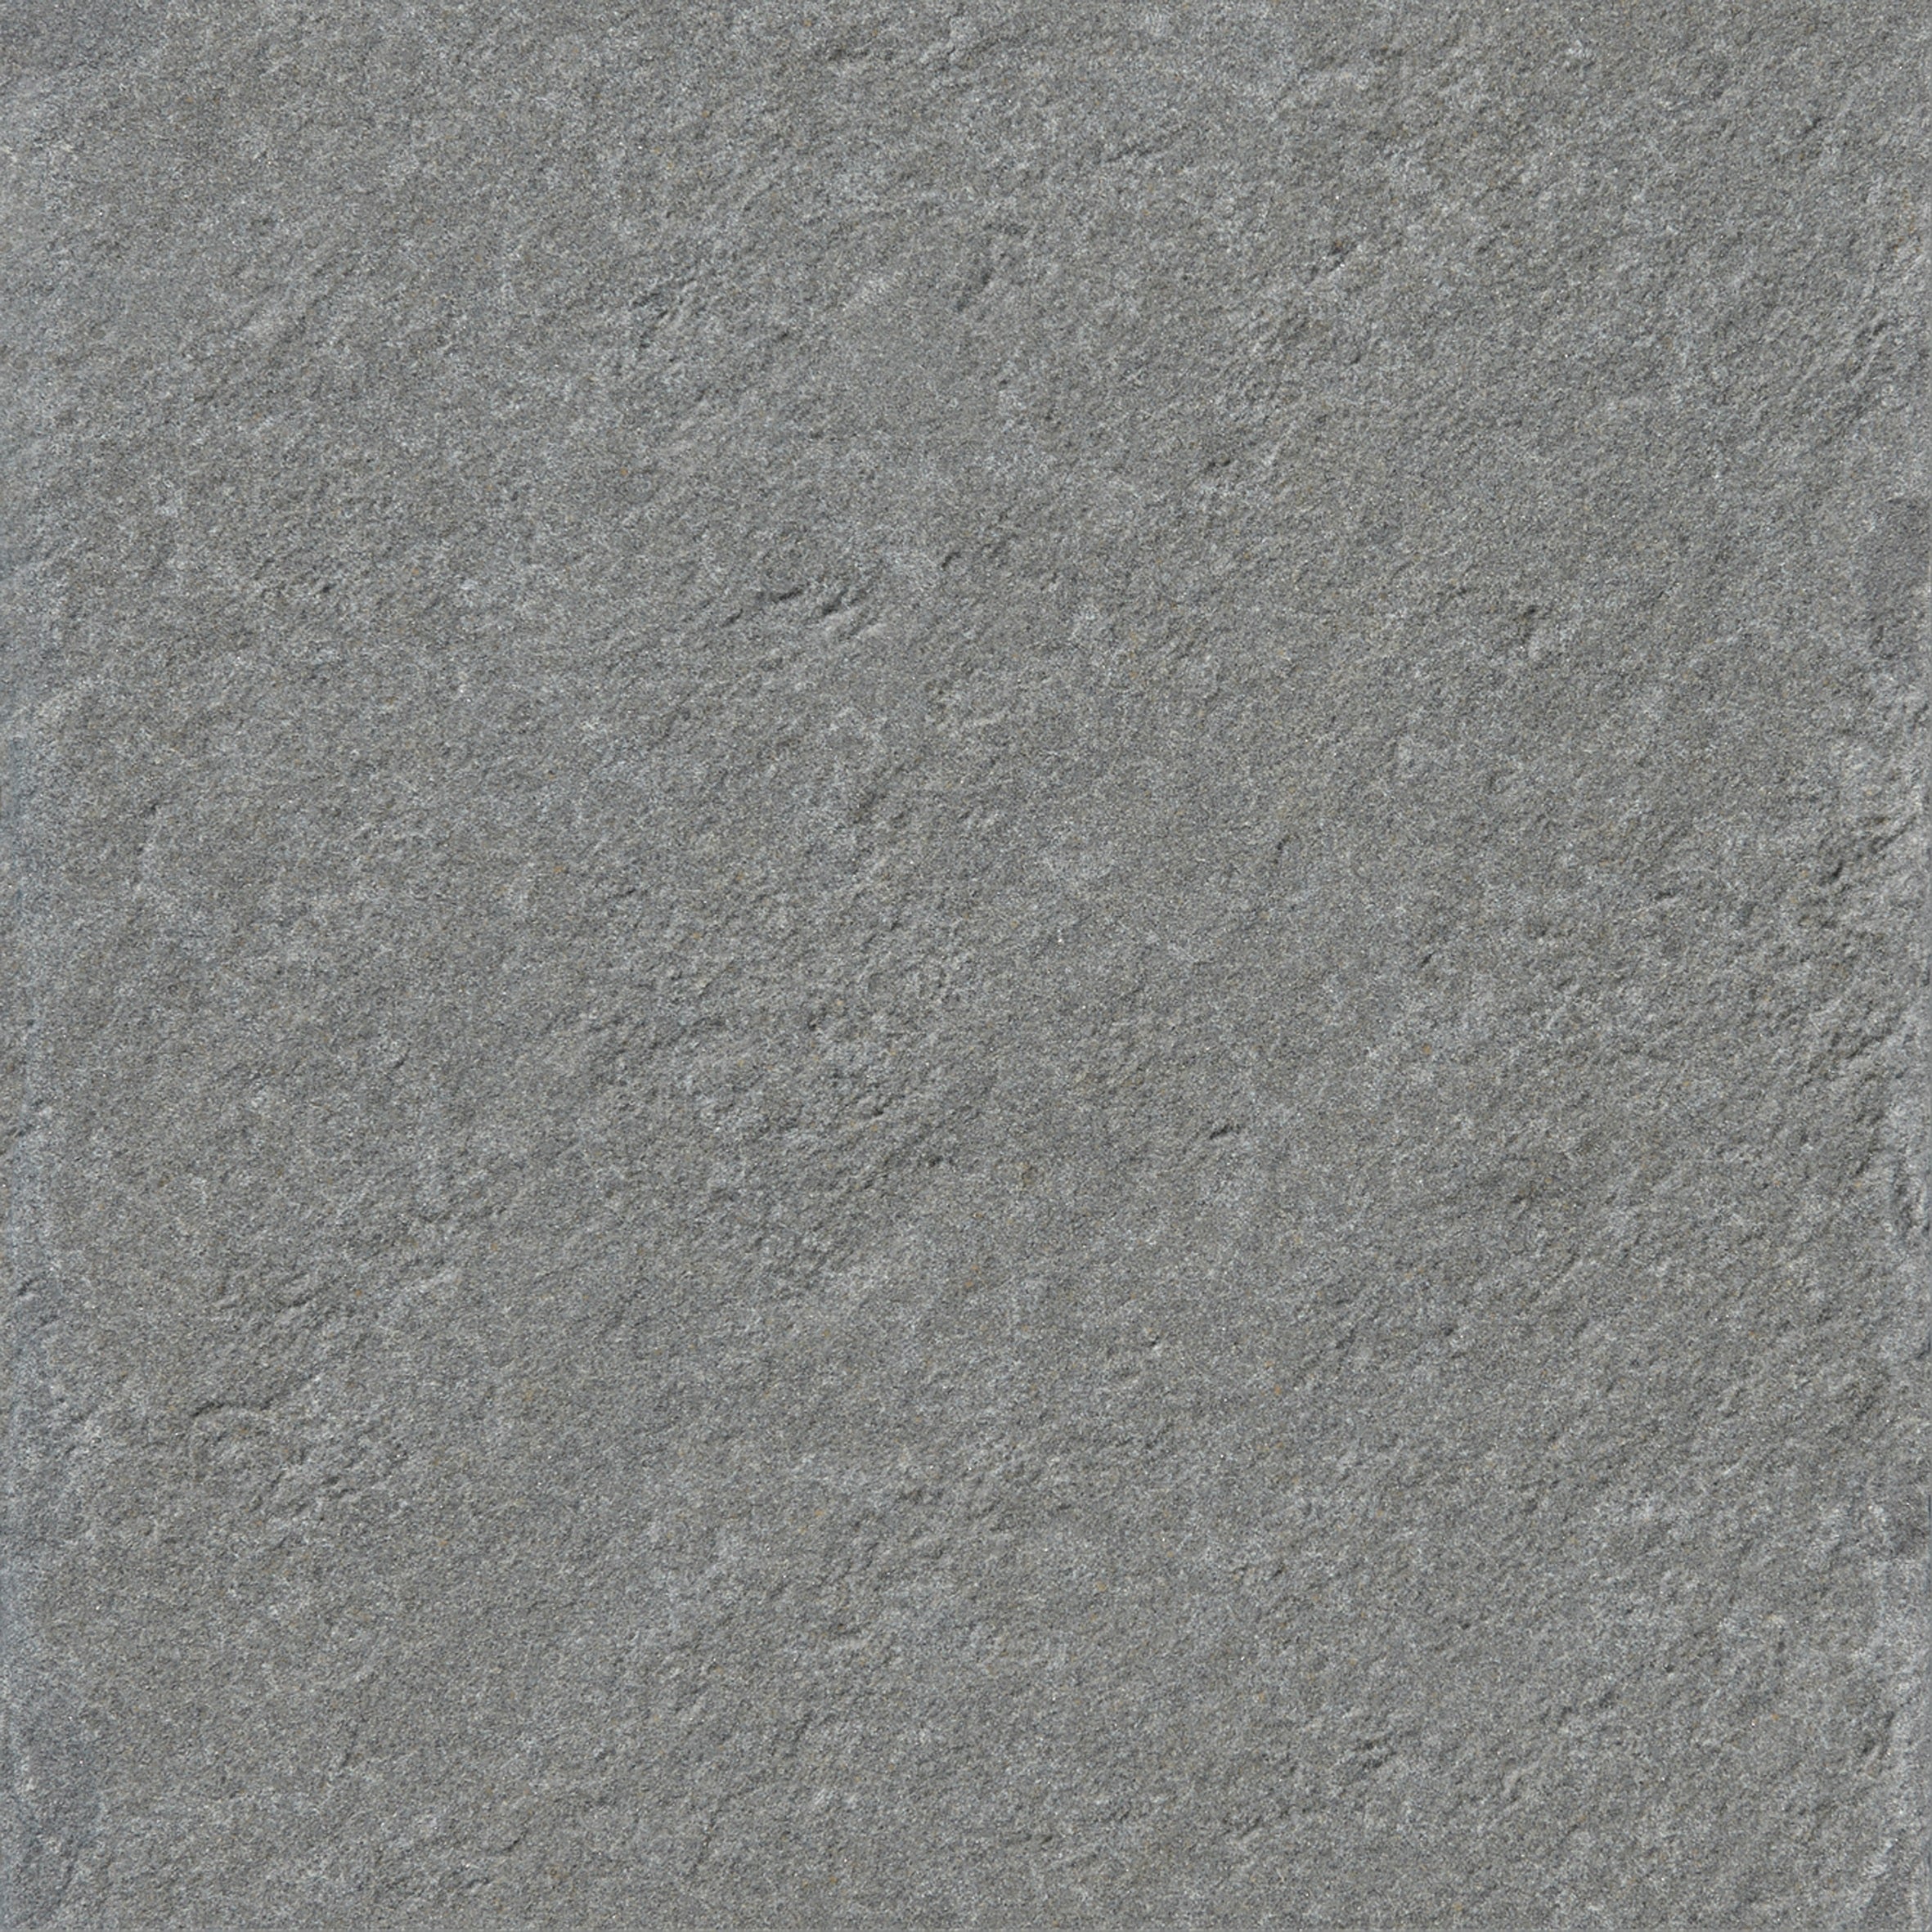 landmark frontier20 bluestone tumbled tumbled paver tile 8_875x8_875x20mm matte pressed porcelain tile distributed by surface group international